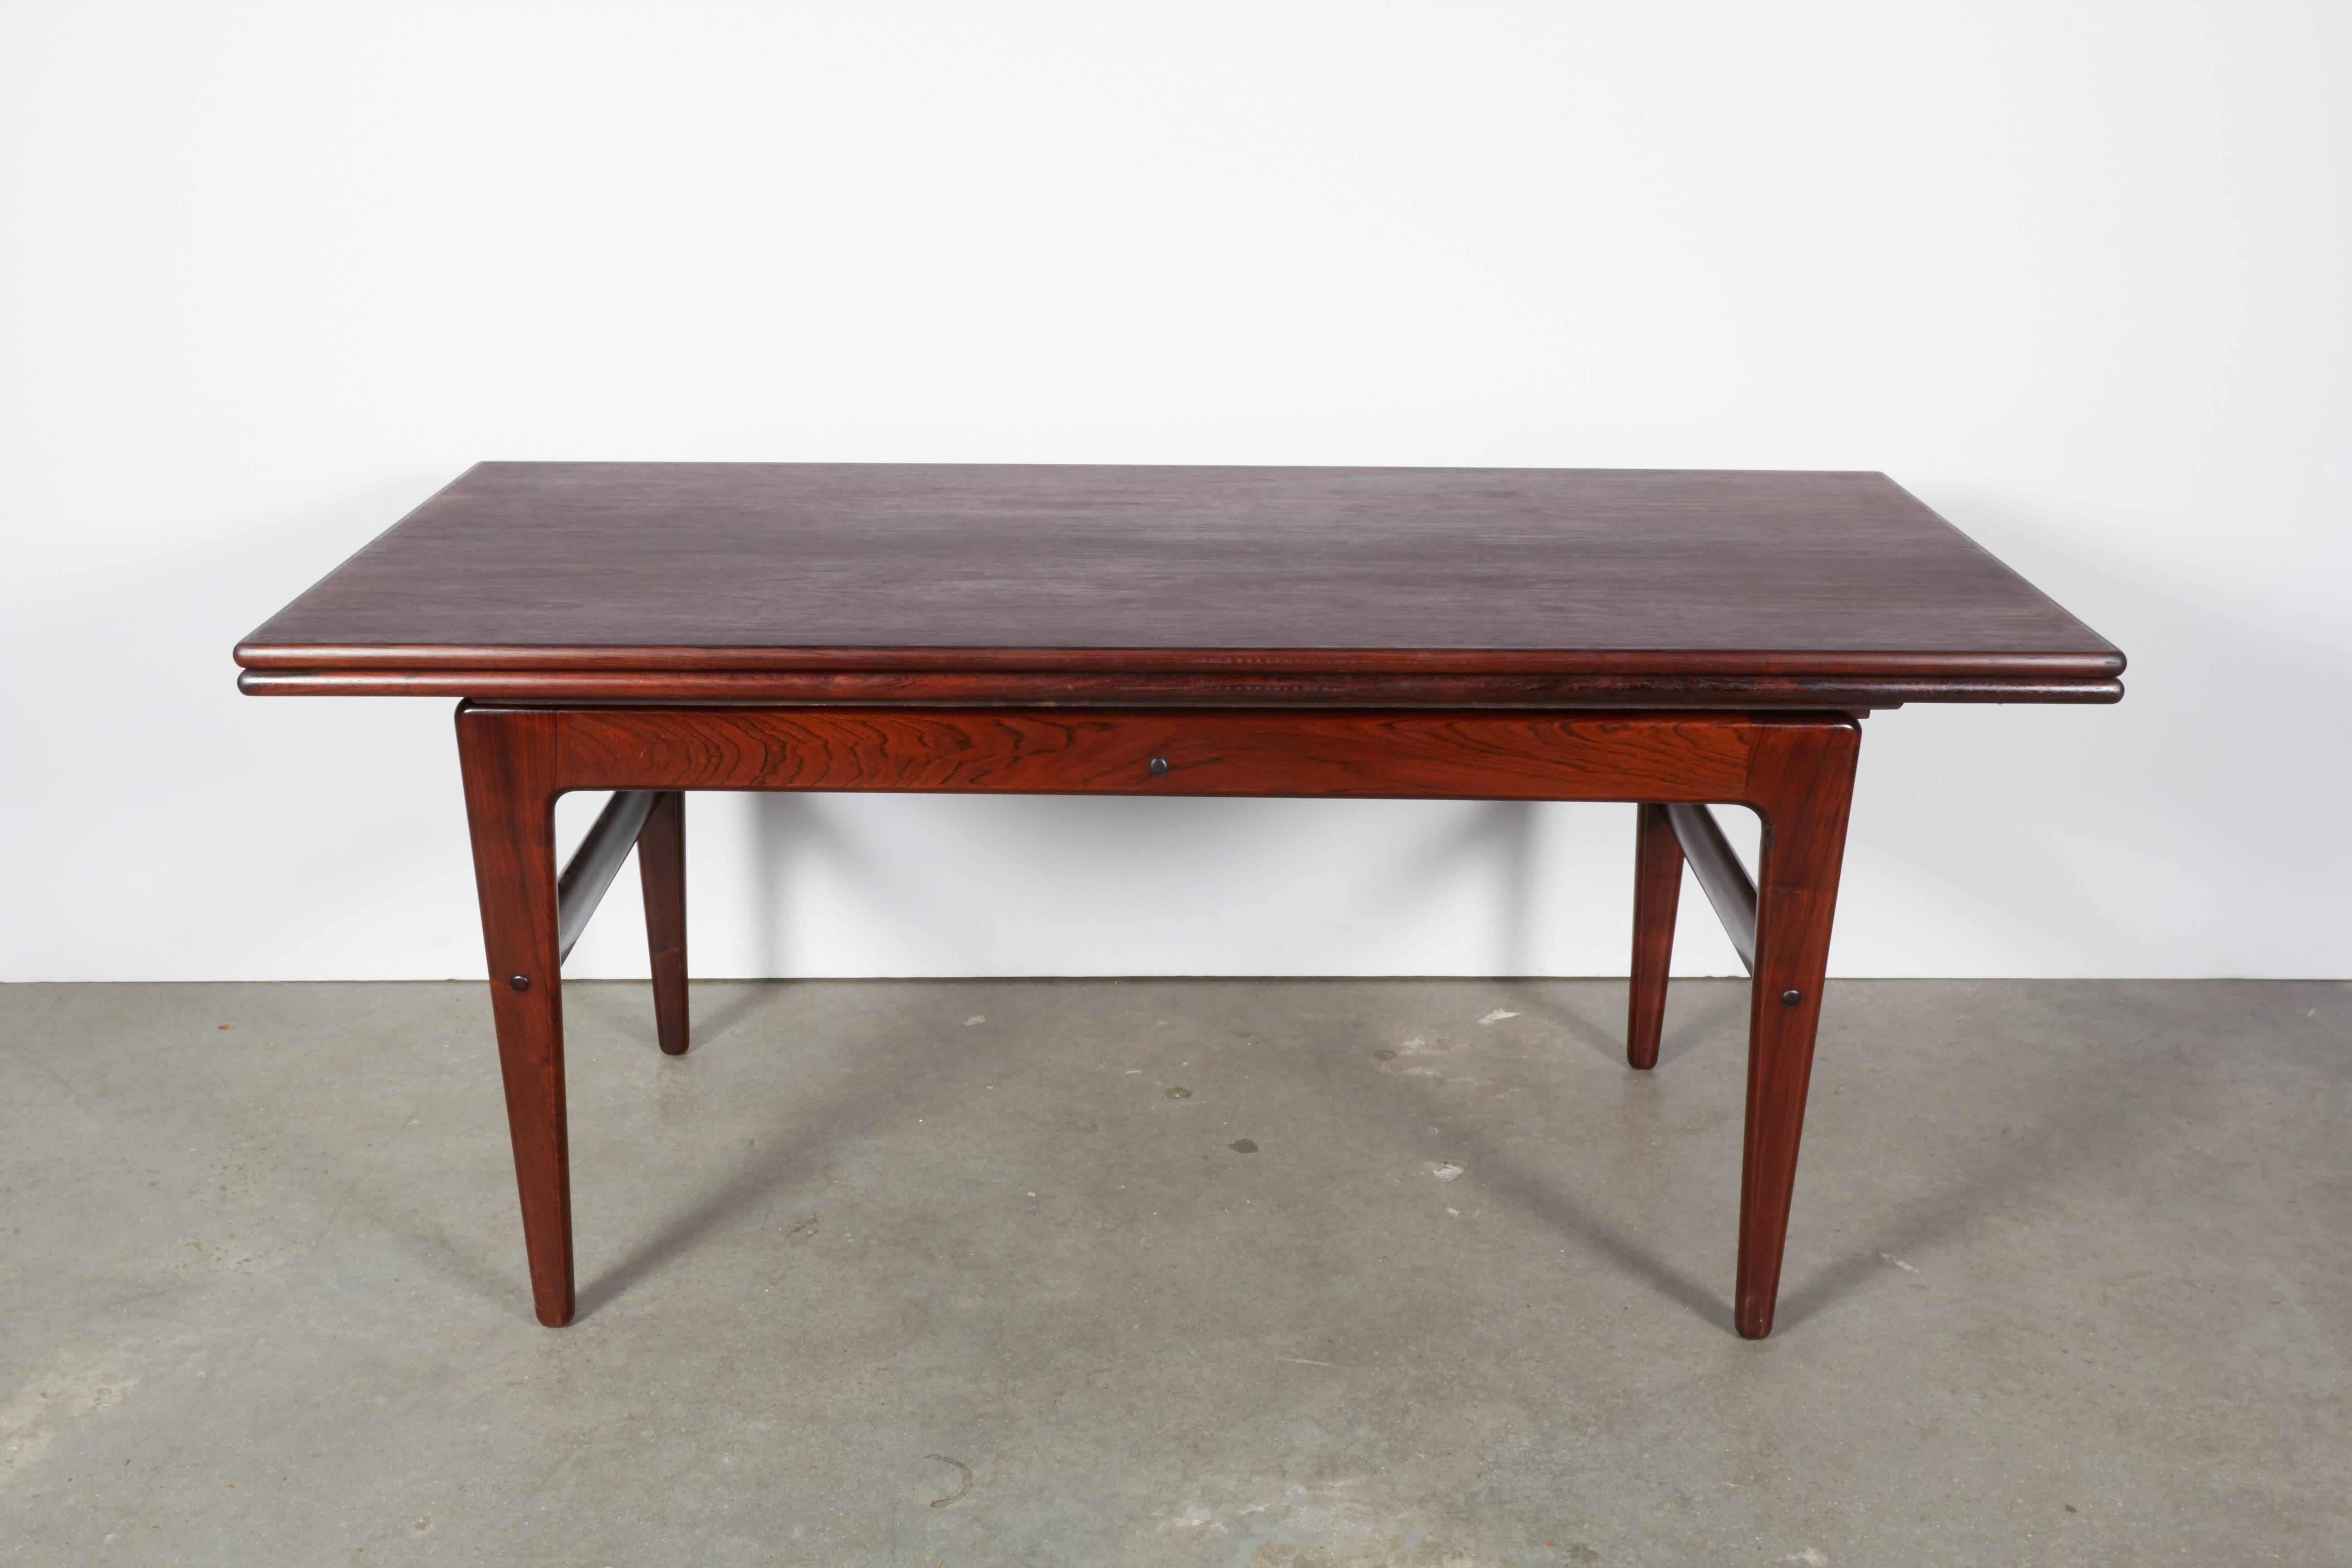 Vintage 1960s Kai Kristiansen Coffee Table / Dining Table

This mid century adjustable table is in excellent condition and transforms into a dining table. The mechanism is simple and easy to use and the leaves just pull out. The height of the dining